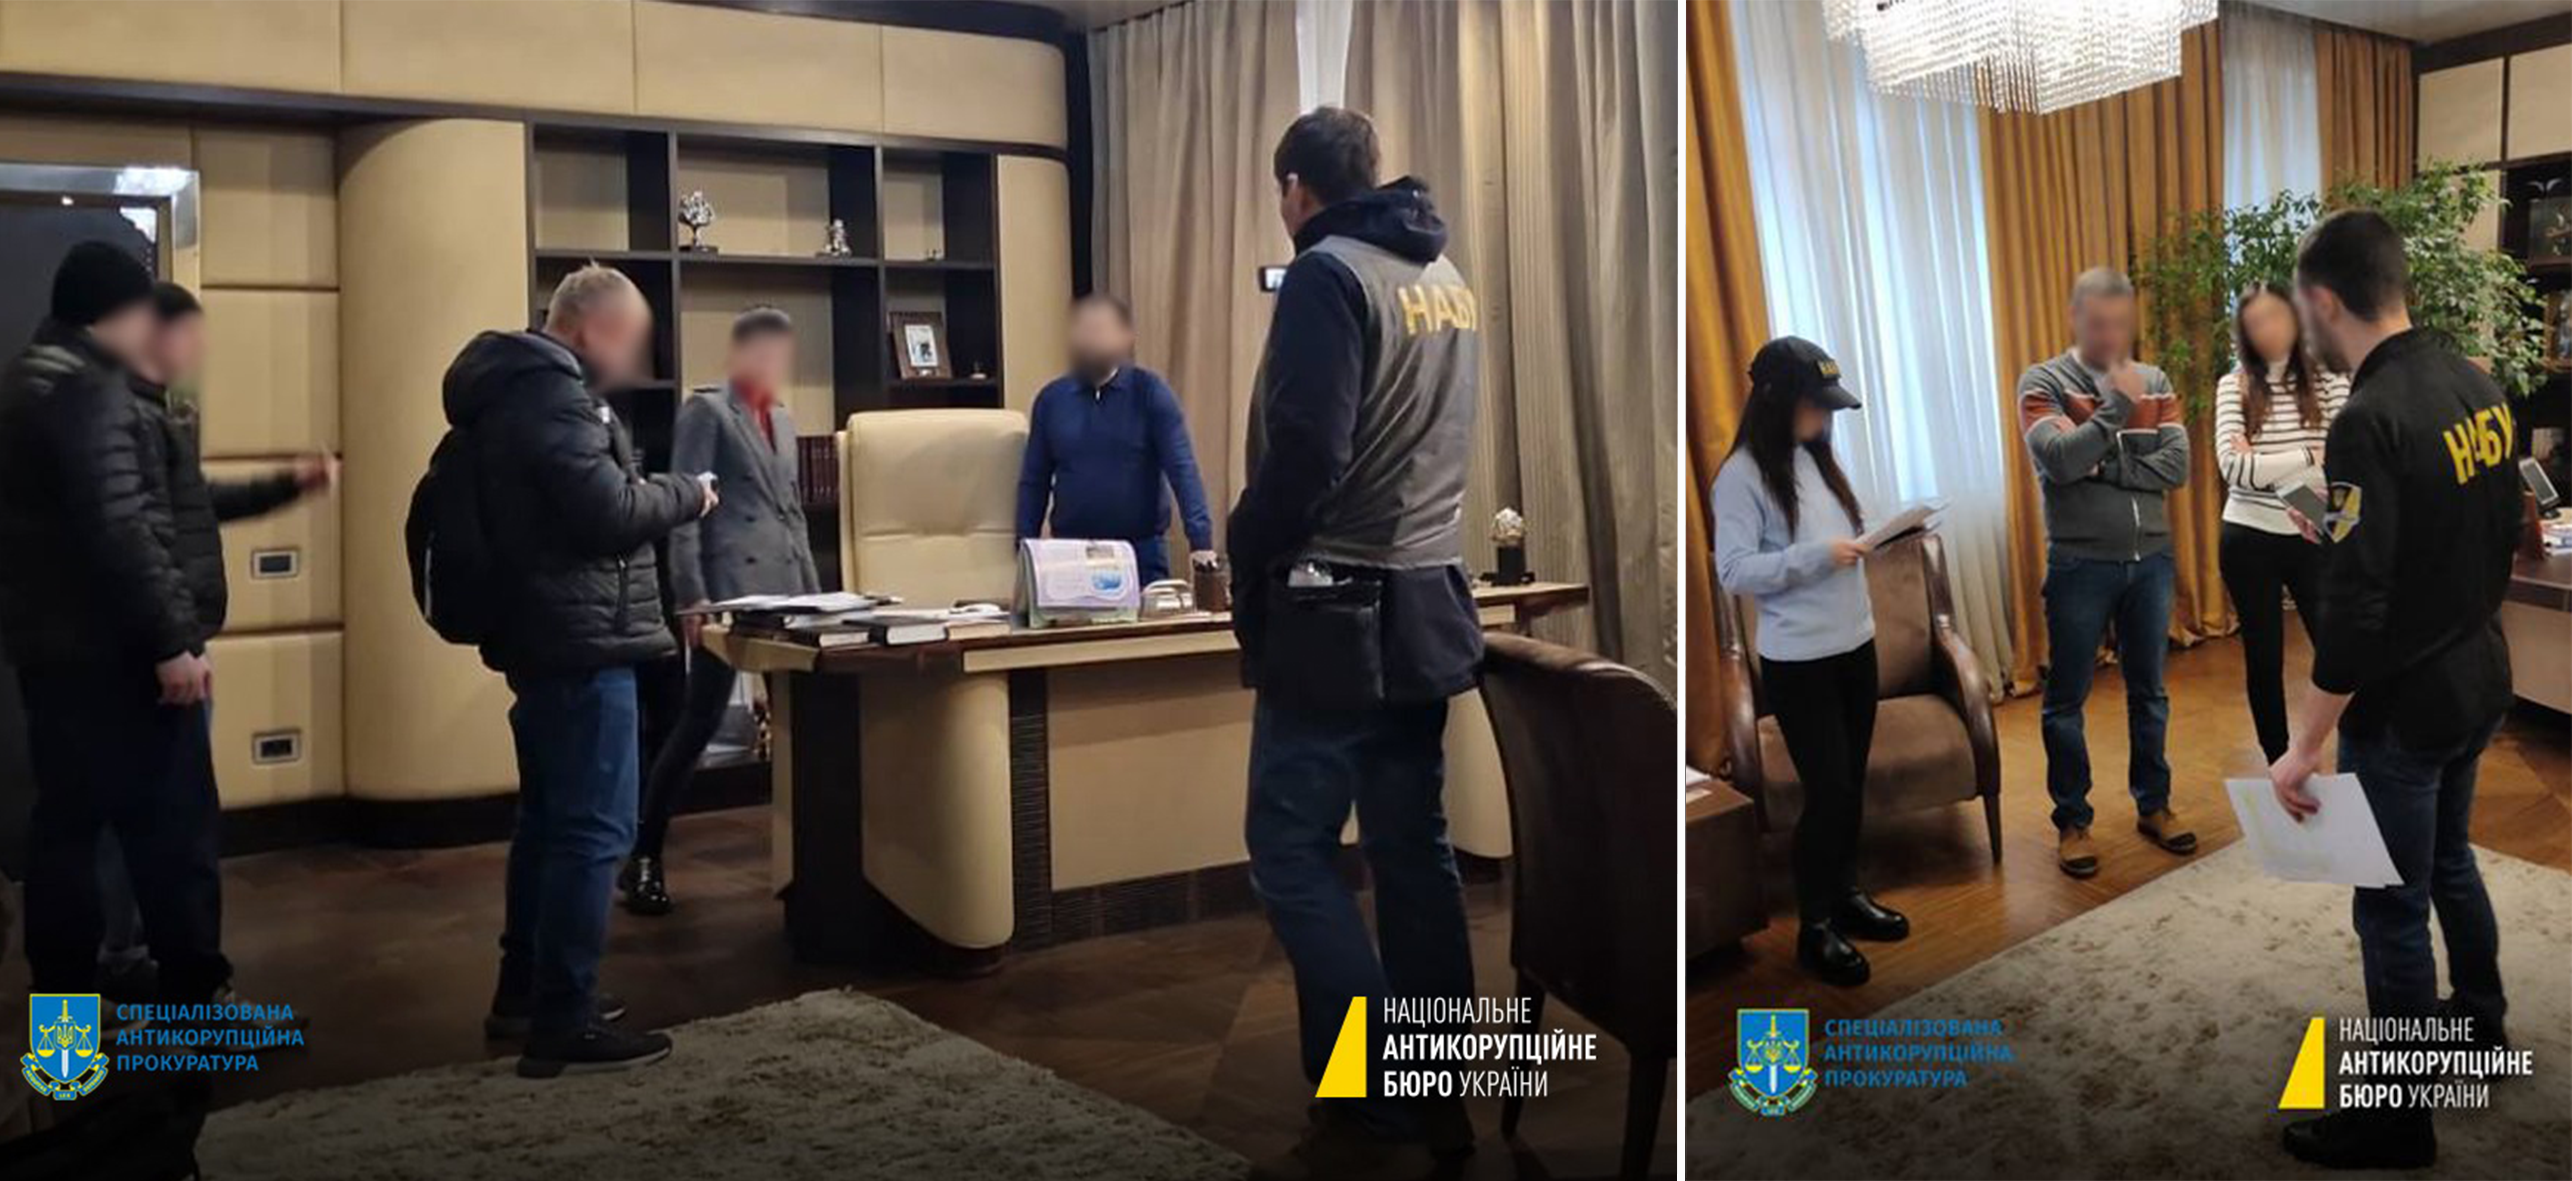 Detention of persons involved in the case of the second "criminal organization" in Odesa